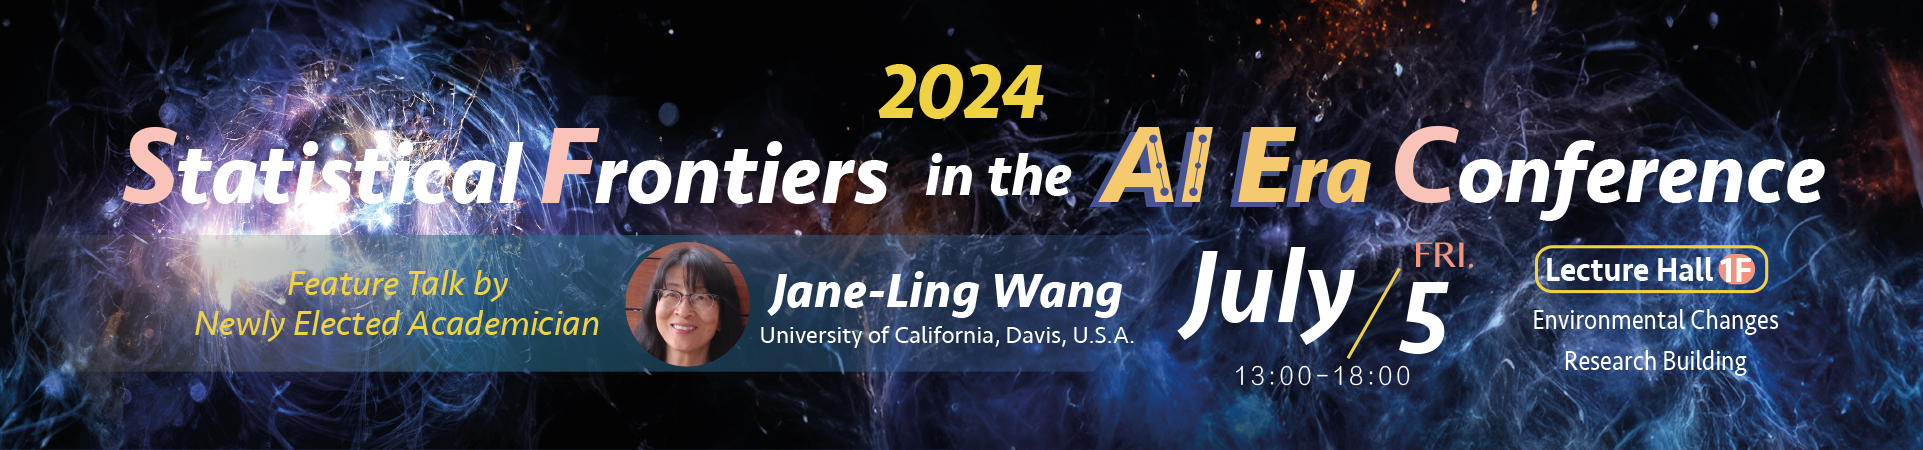 2024 Statistical Frontiers in the AI Era Conference